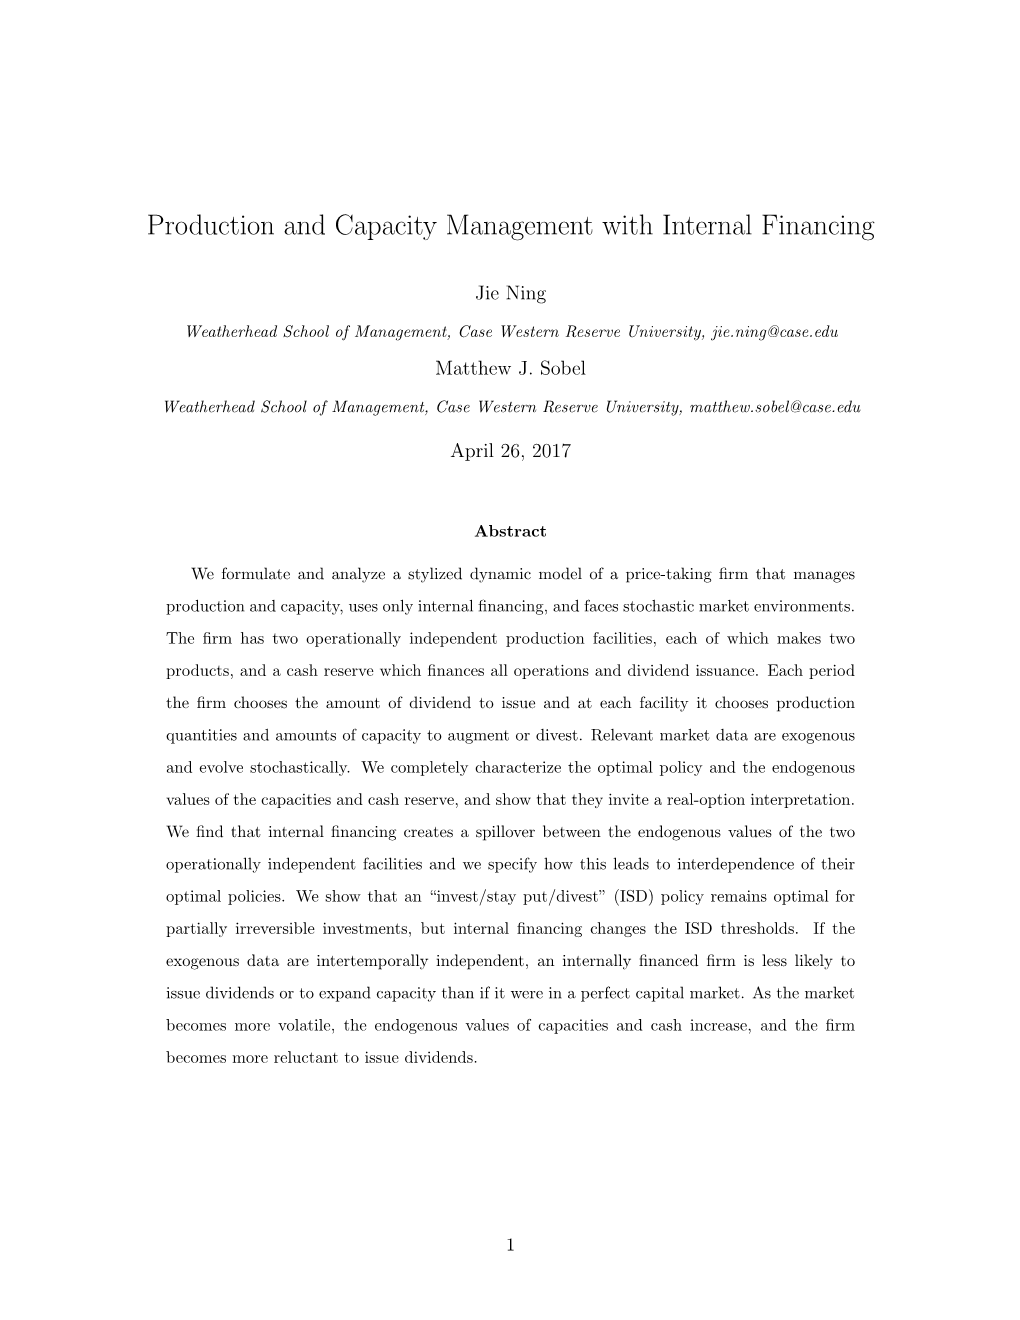 Production and Capacity Management with Internal Financing